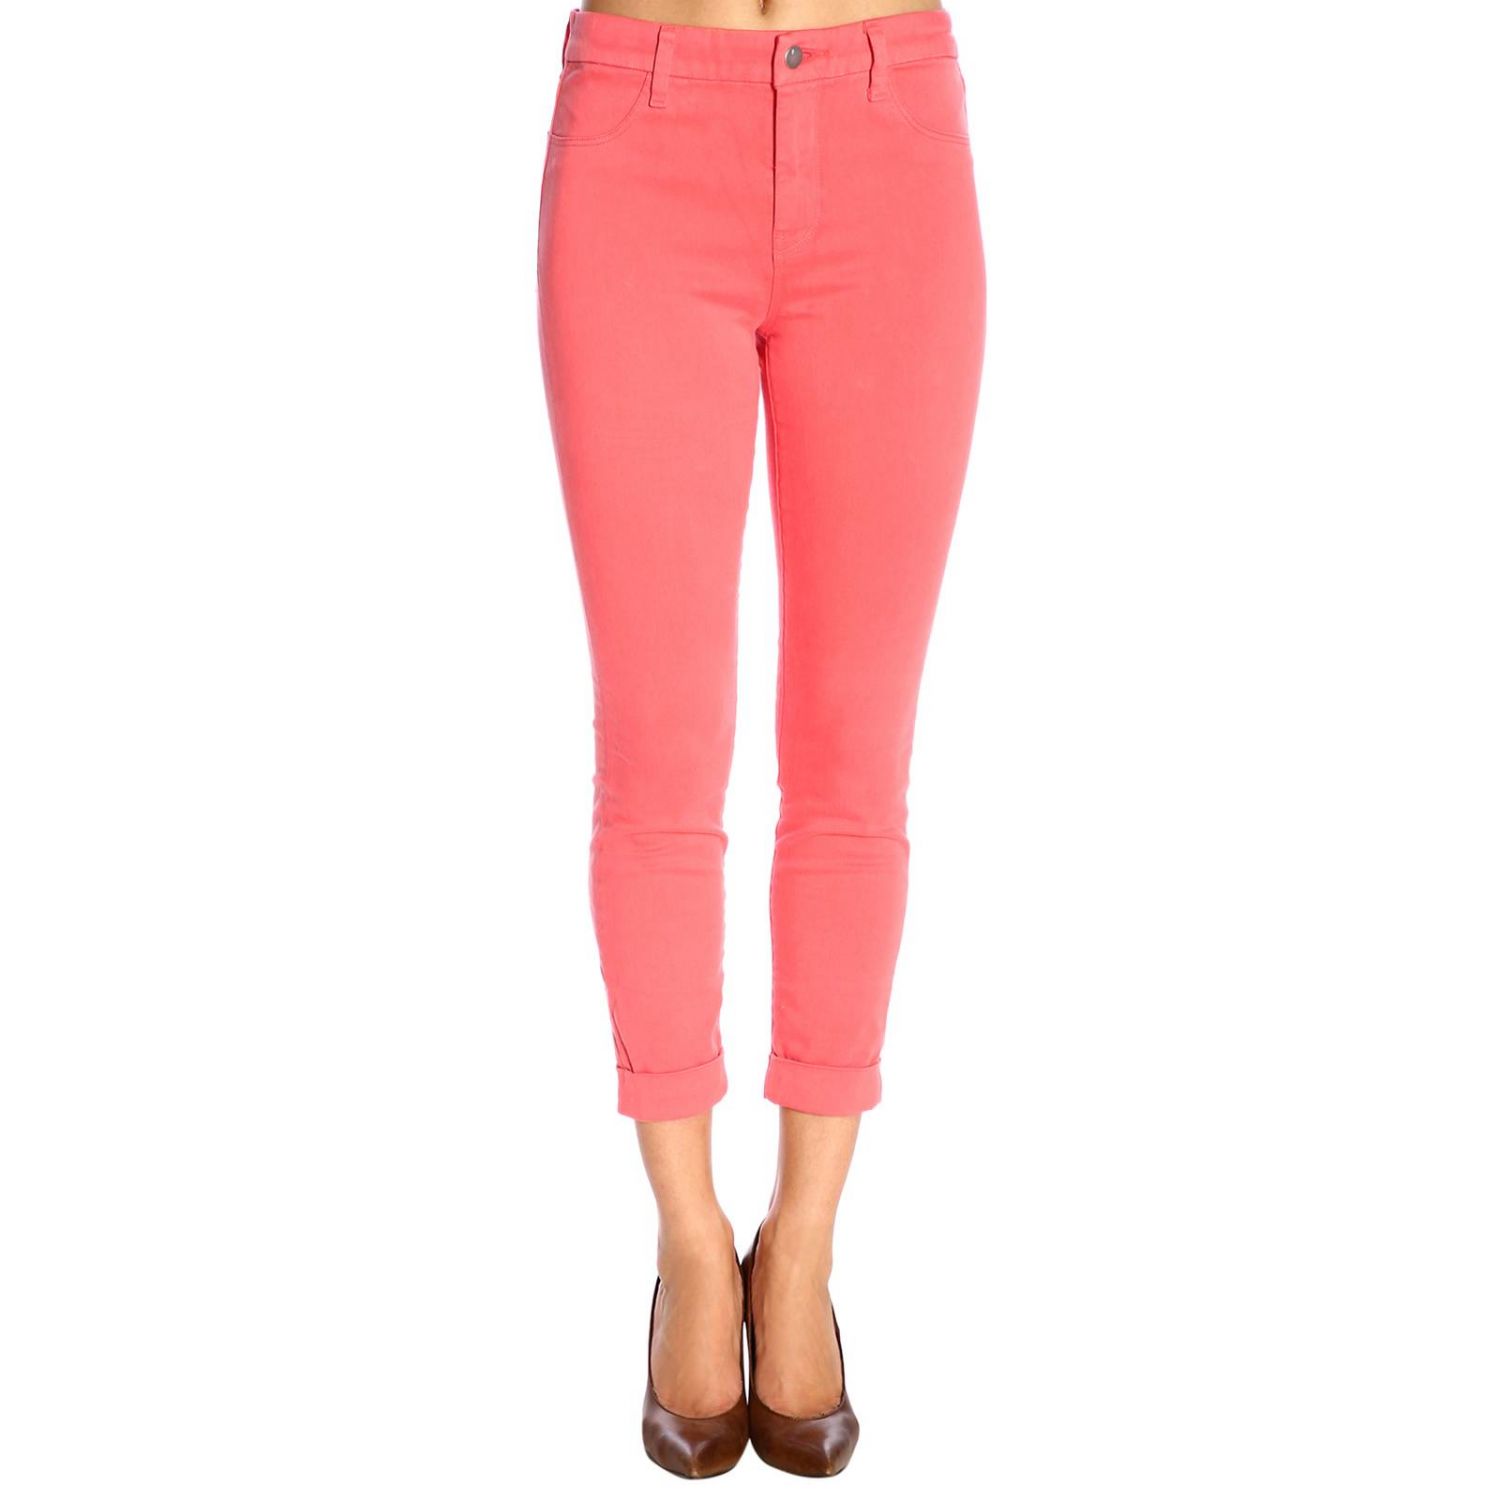 coral brand jeans